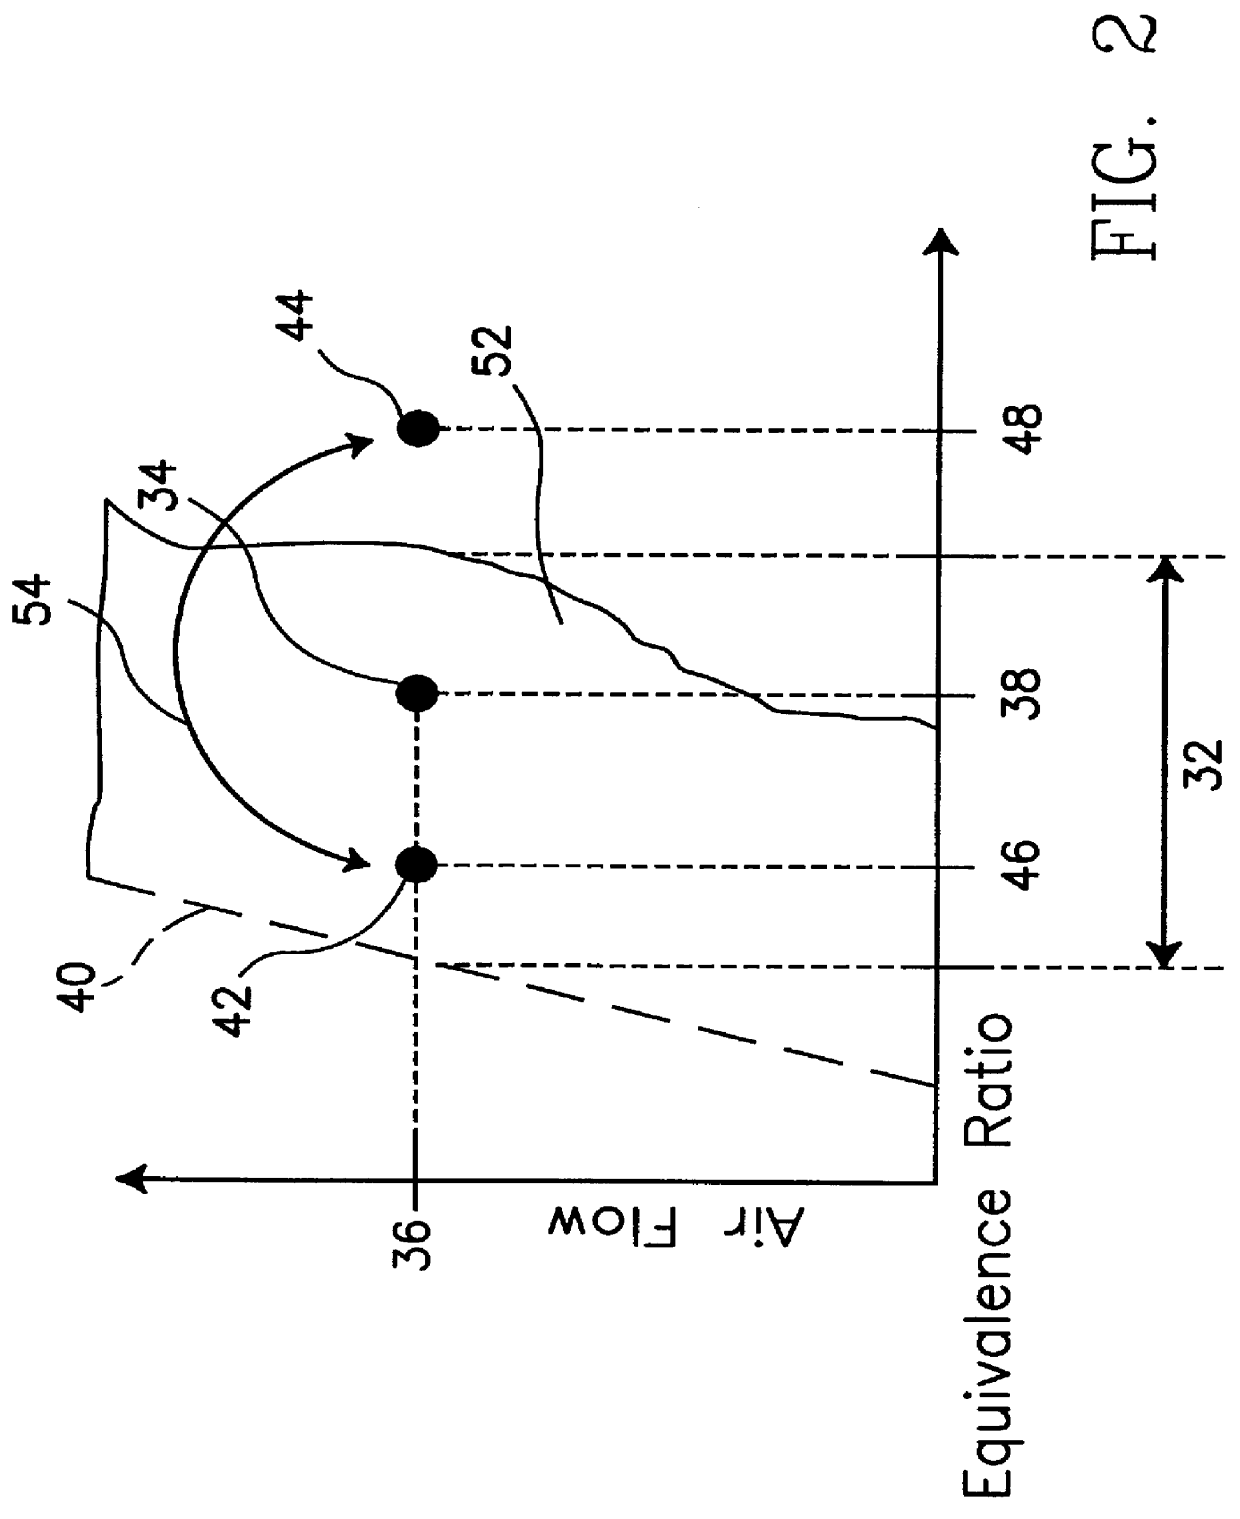 Periodic equivalence ratio modulation method and apparatus for controlling combustion instability